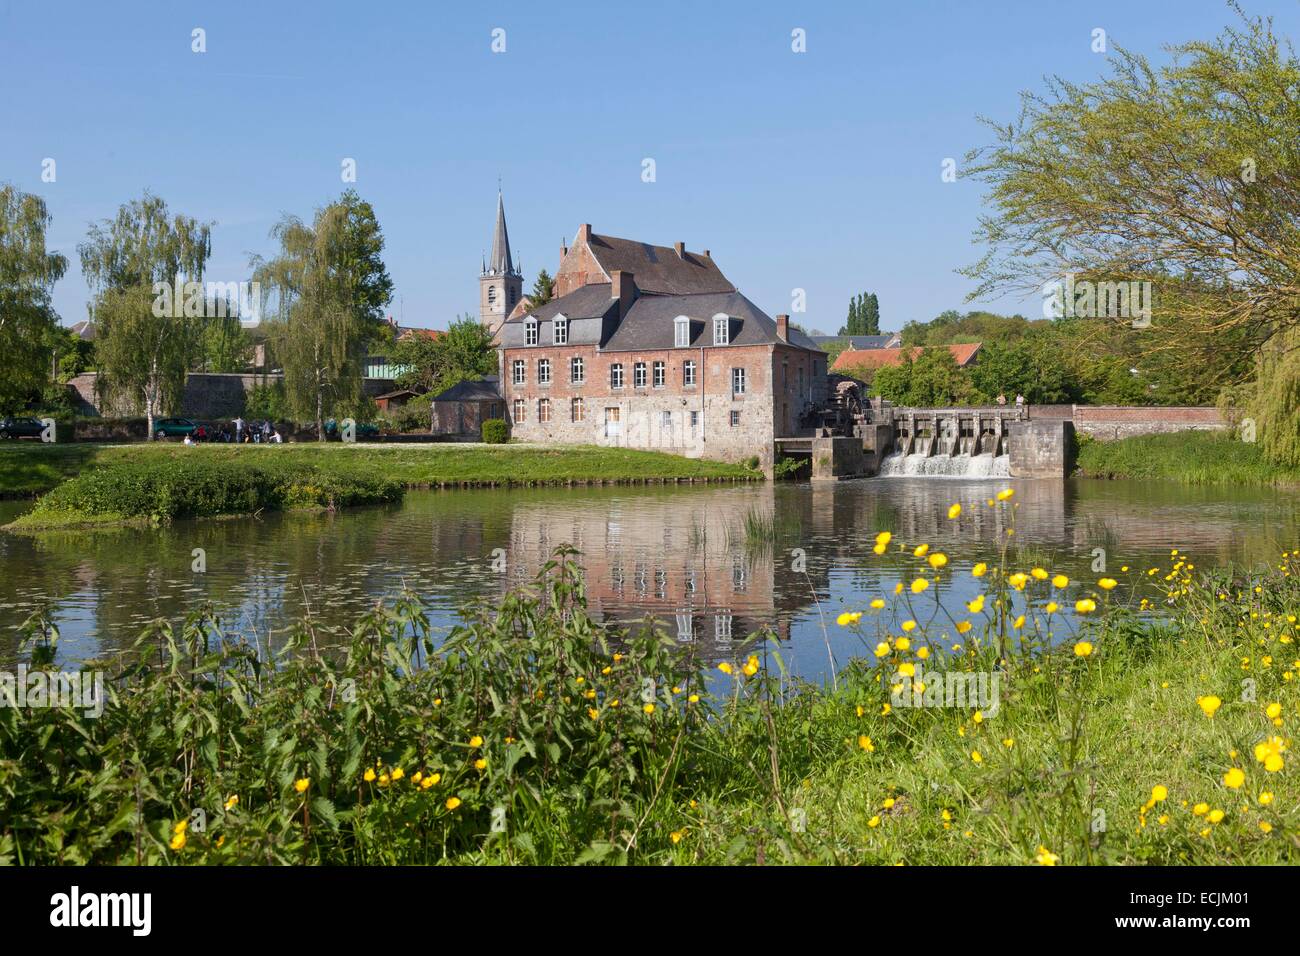 France, Nord, Maroilles, Abbey mill built in the 17th century and the helpe mineure river Stock Photo